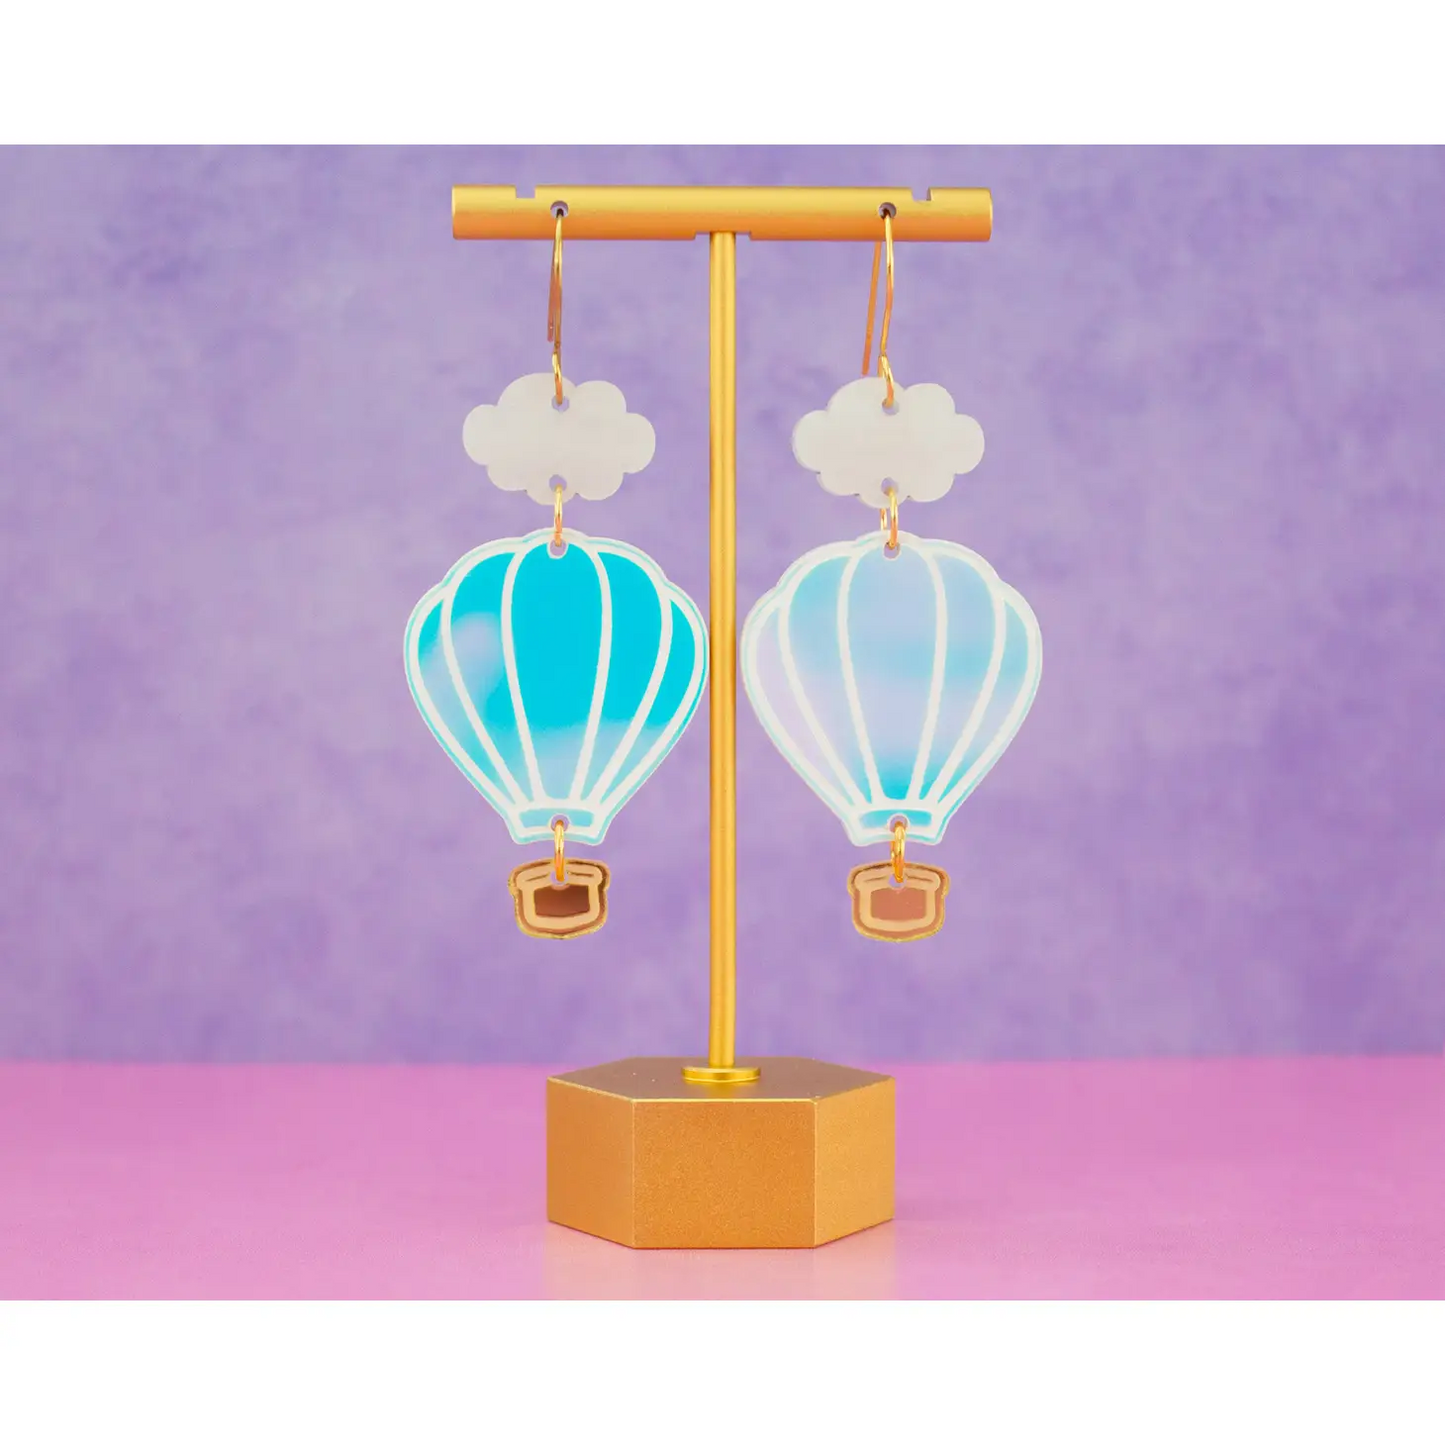 Hot Air Balloon Holographic Earrings